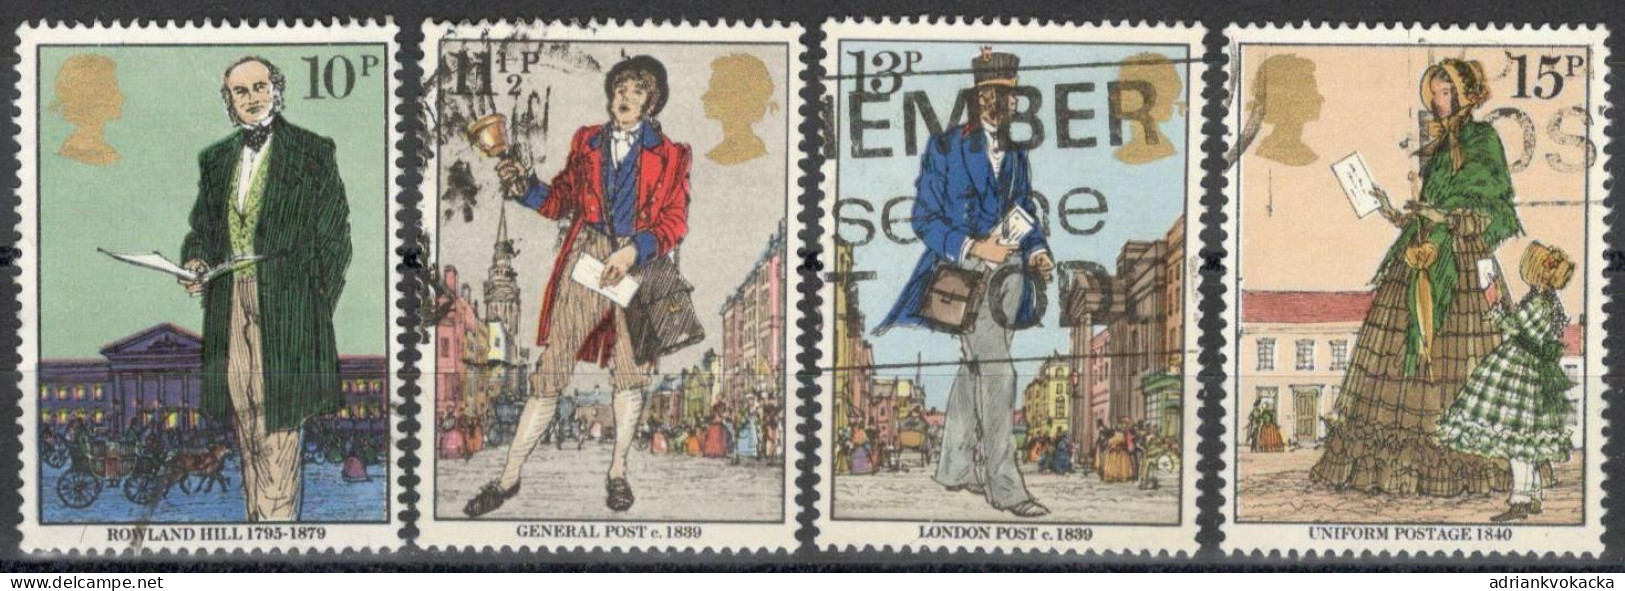 United Kingdom - Centenary Of The Death Of Sir Rowland Hill, Complete Series Of Cancelled Stamps Mi:GB 804-807 (1979) - Usati